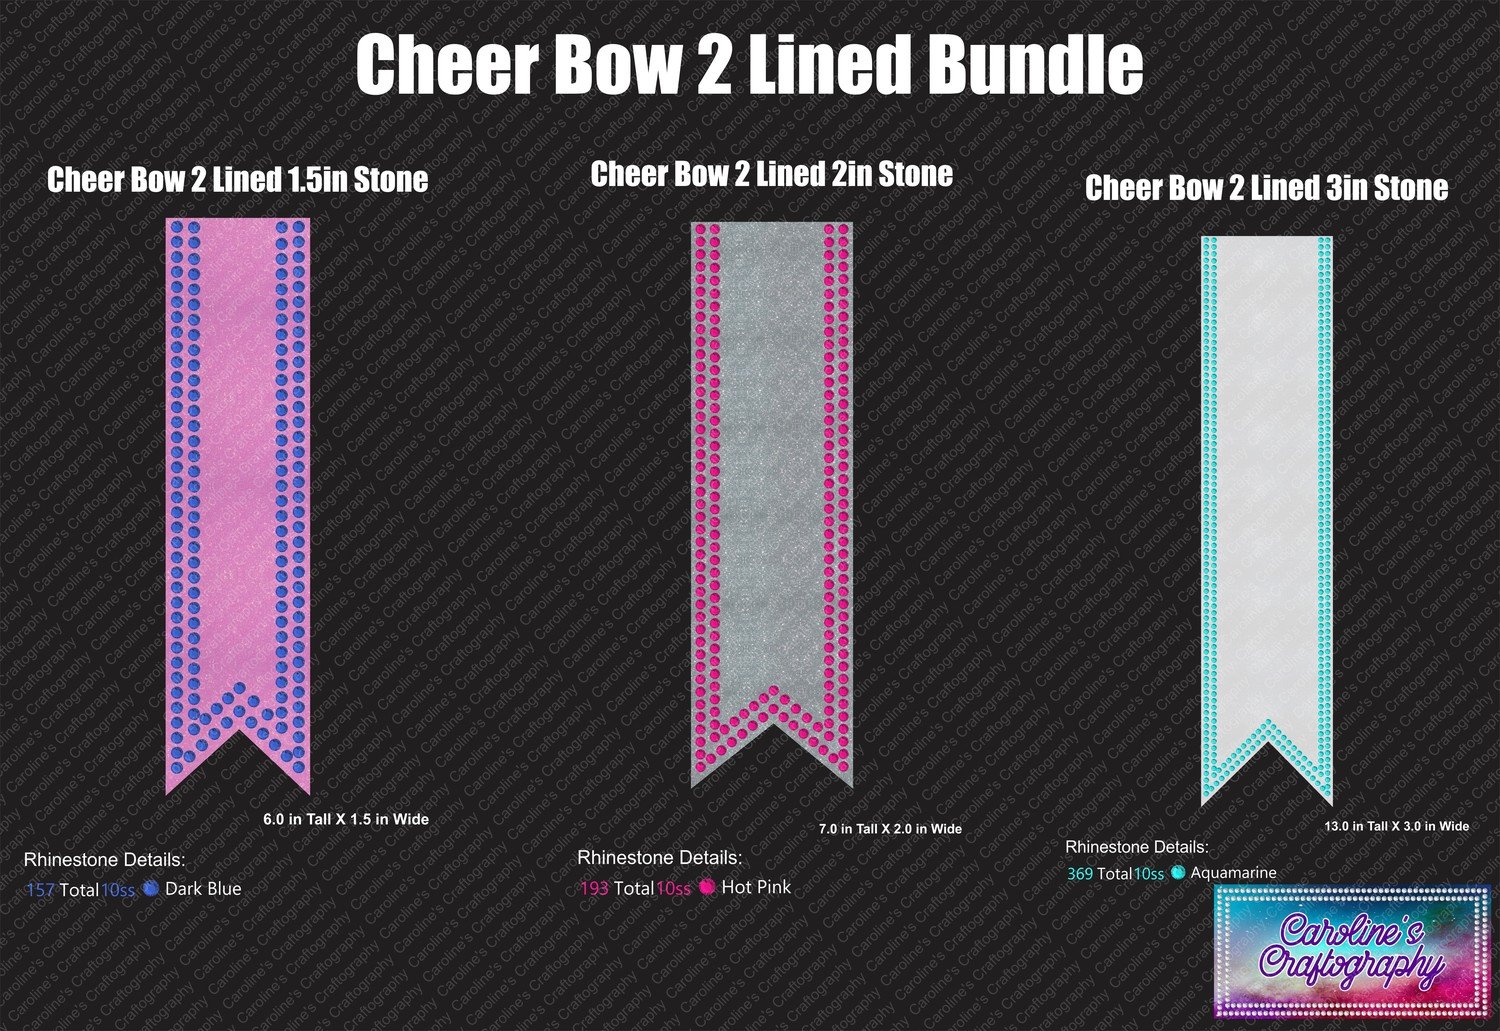 Cheer Bow 2 Lines Stone Bundle